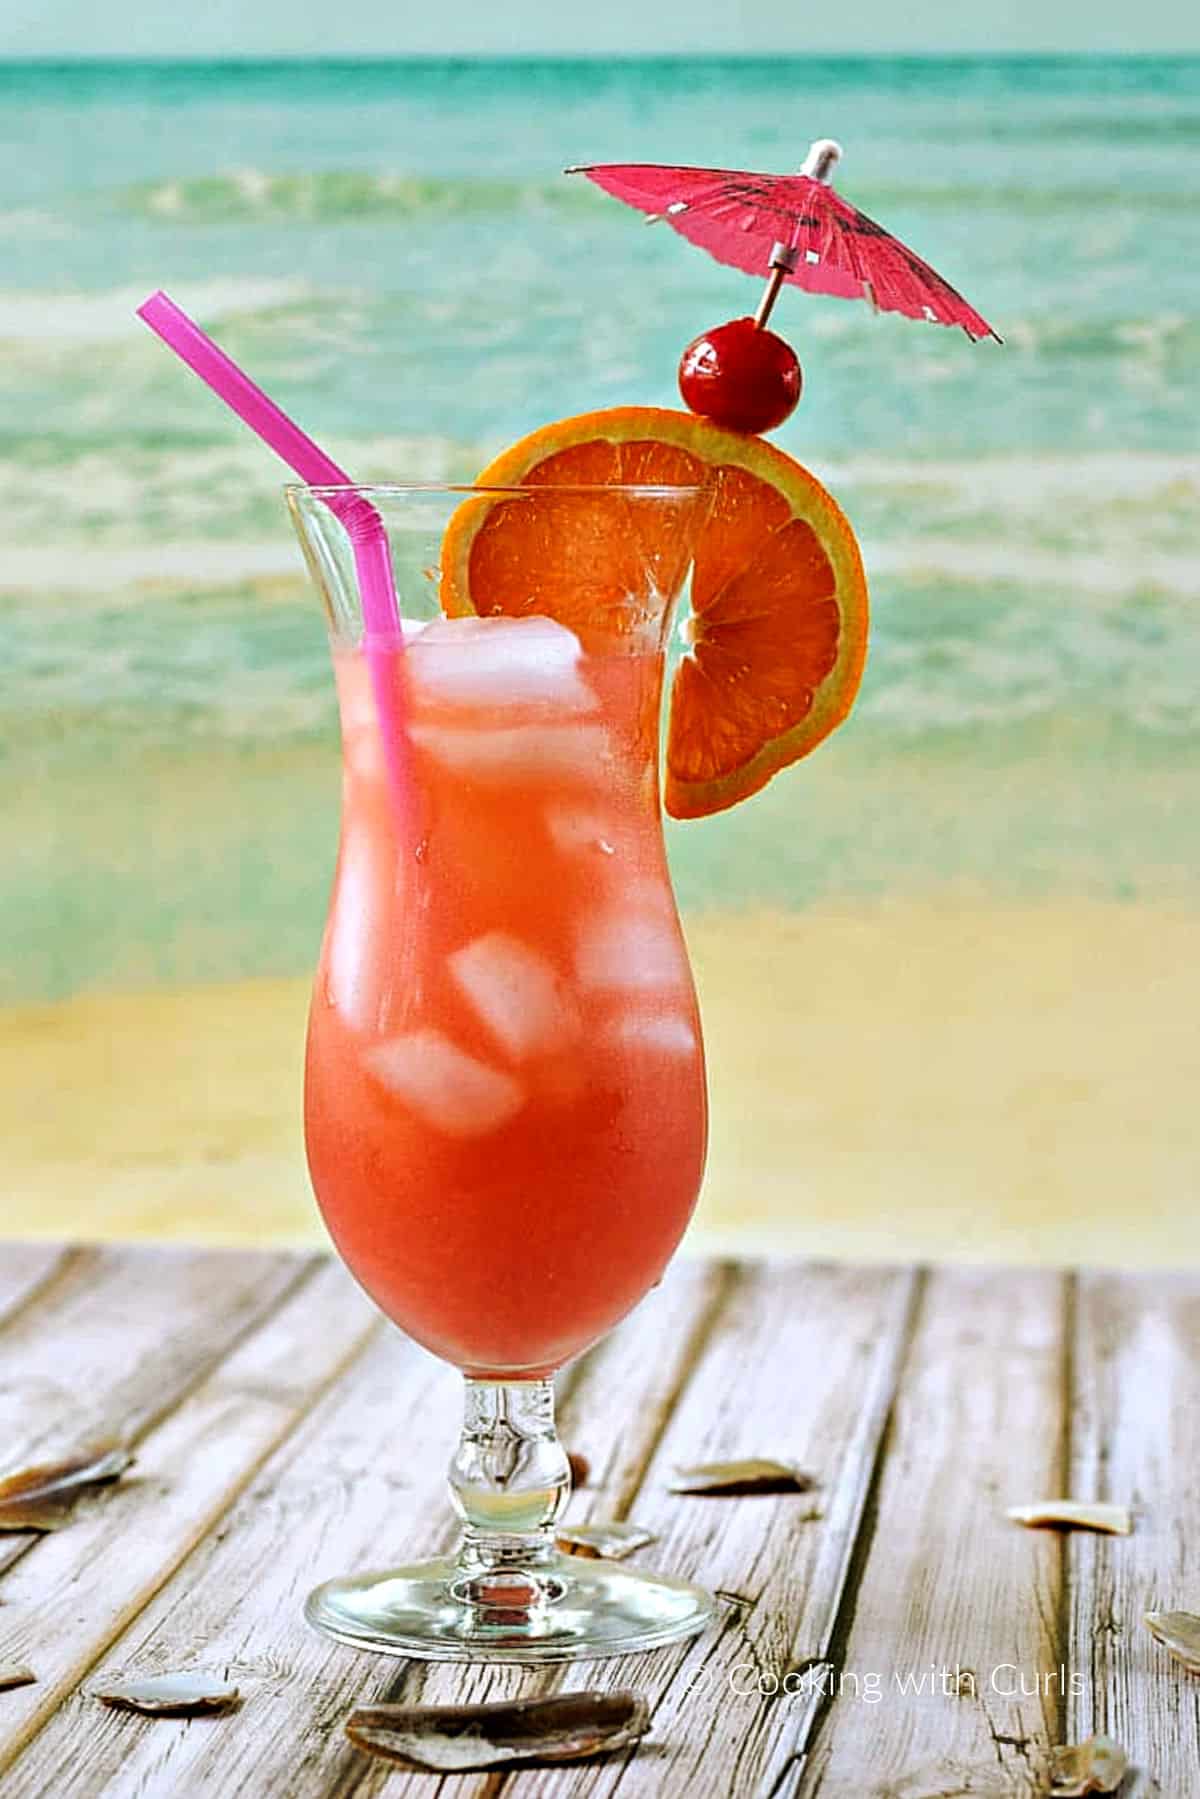 A bright pink Bahama Mama drink in a hurricane glass garnished with an orange wheel, cherry, and pink paper umbrella.